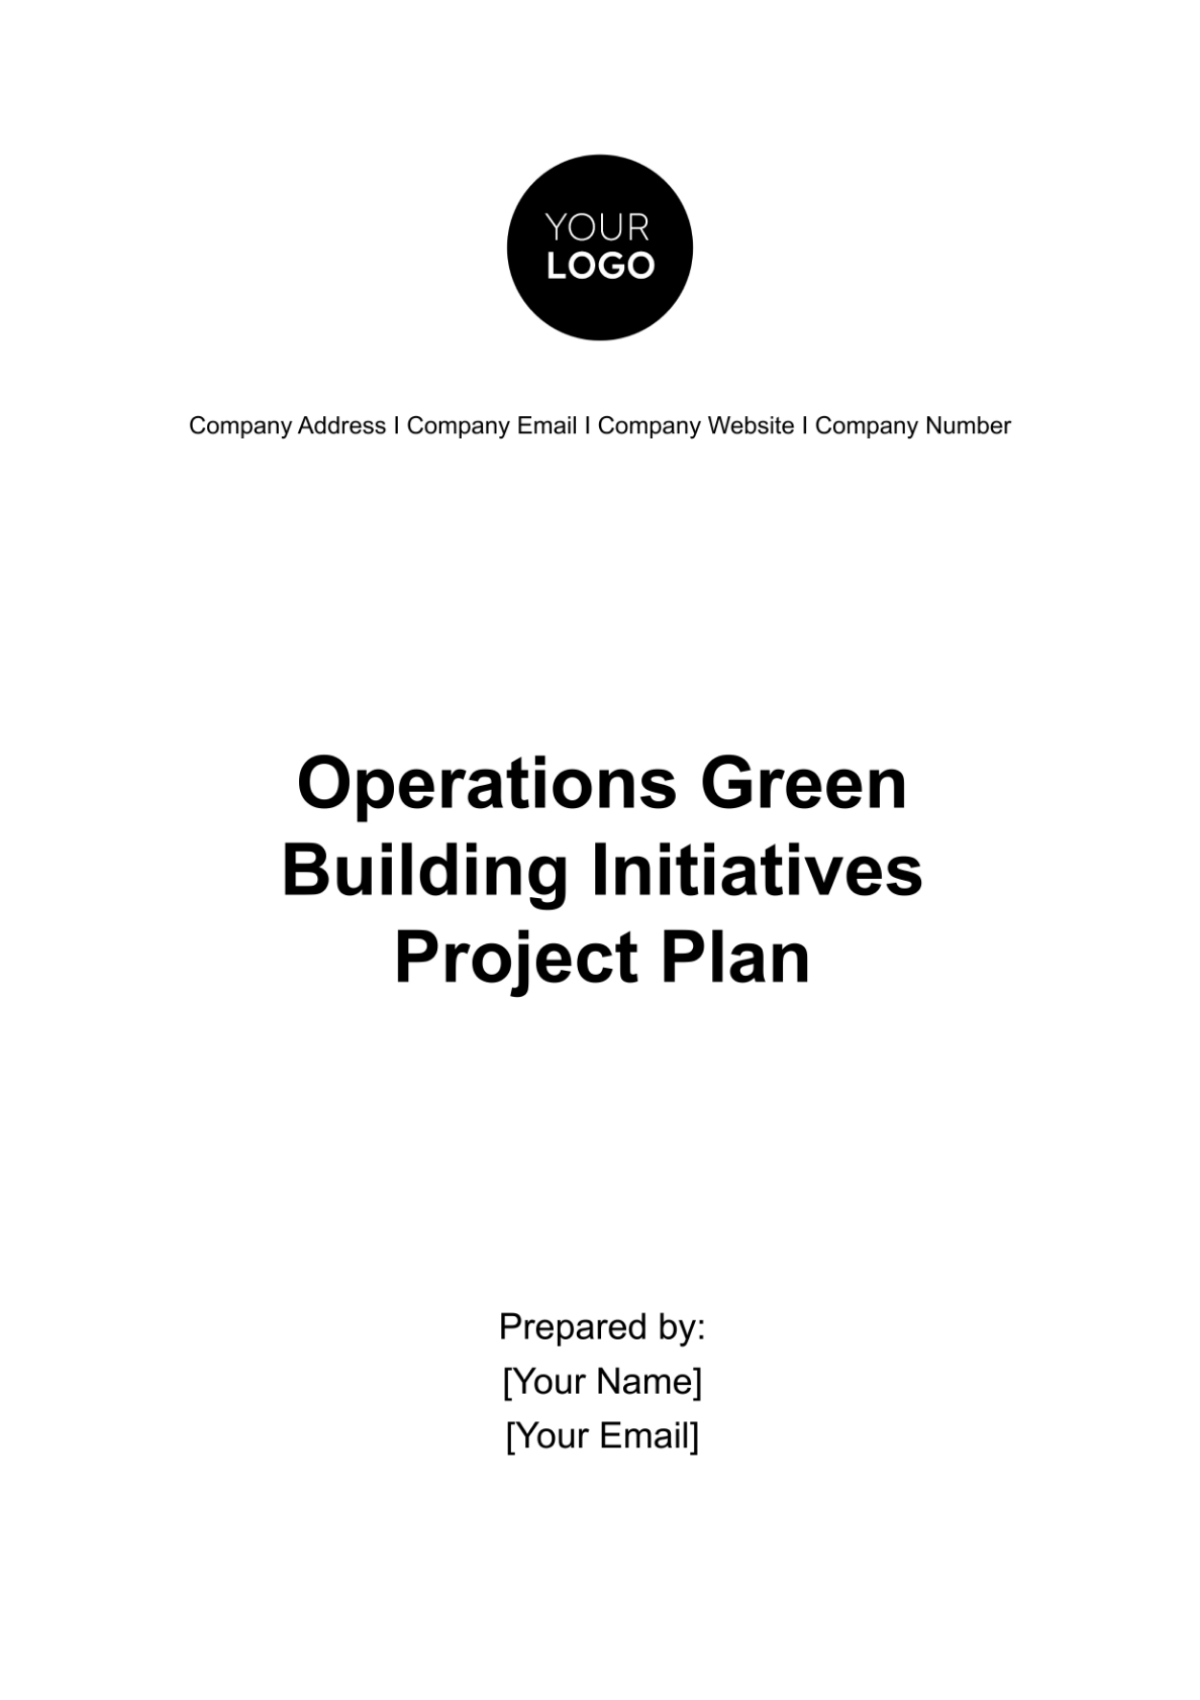 Operations Green Building Initiatives Project Plan Template